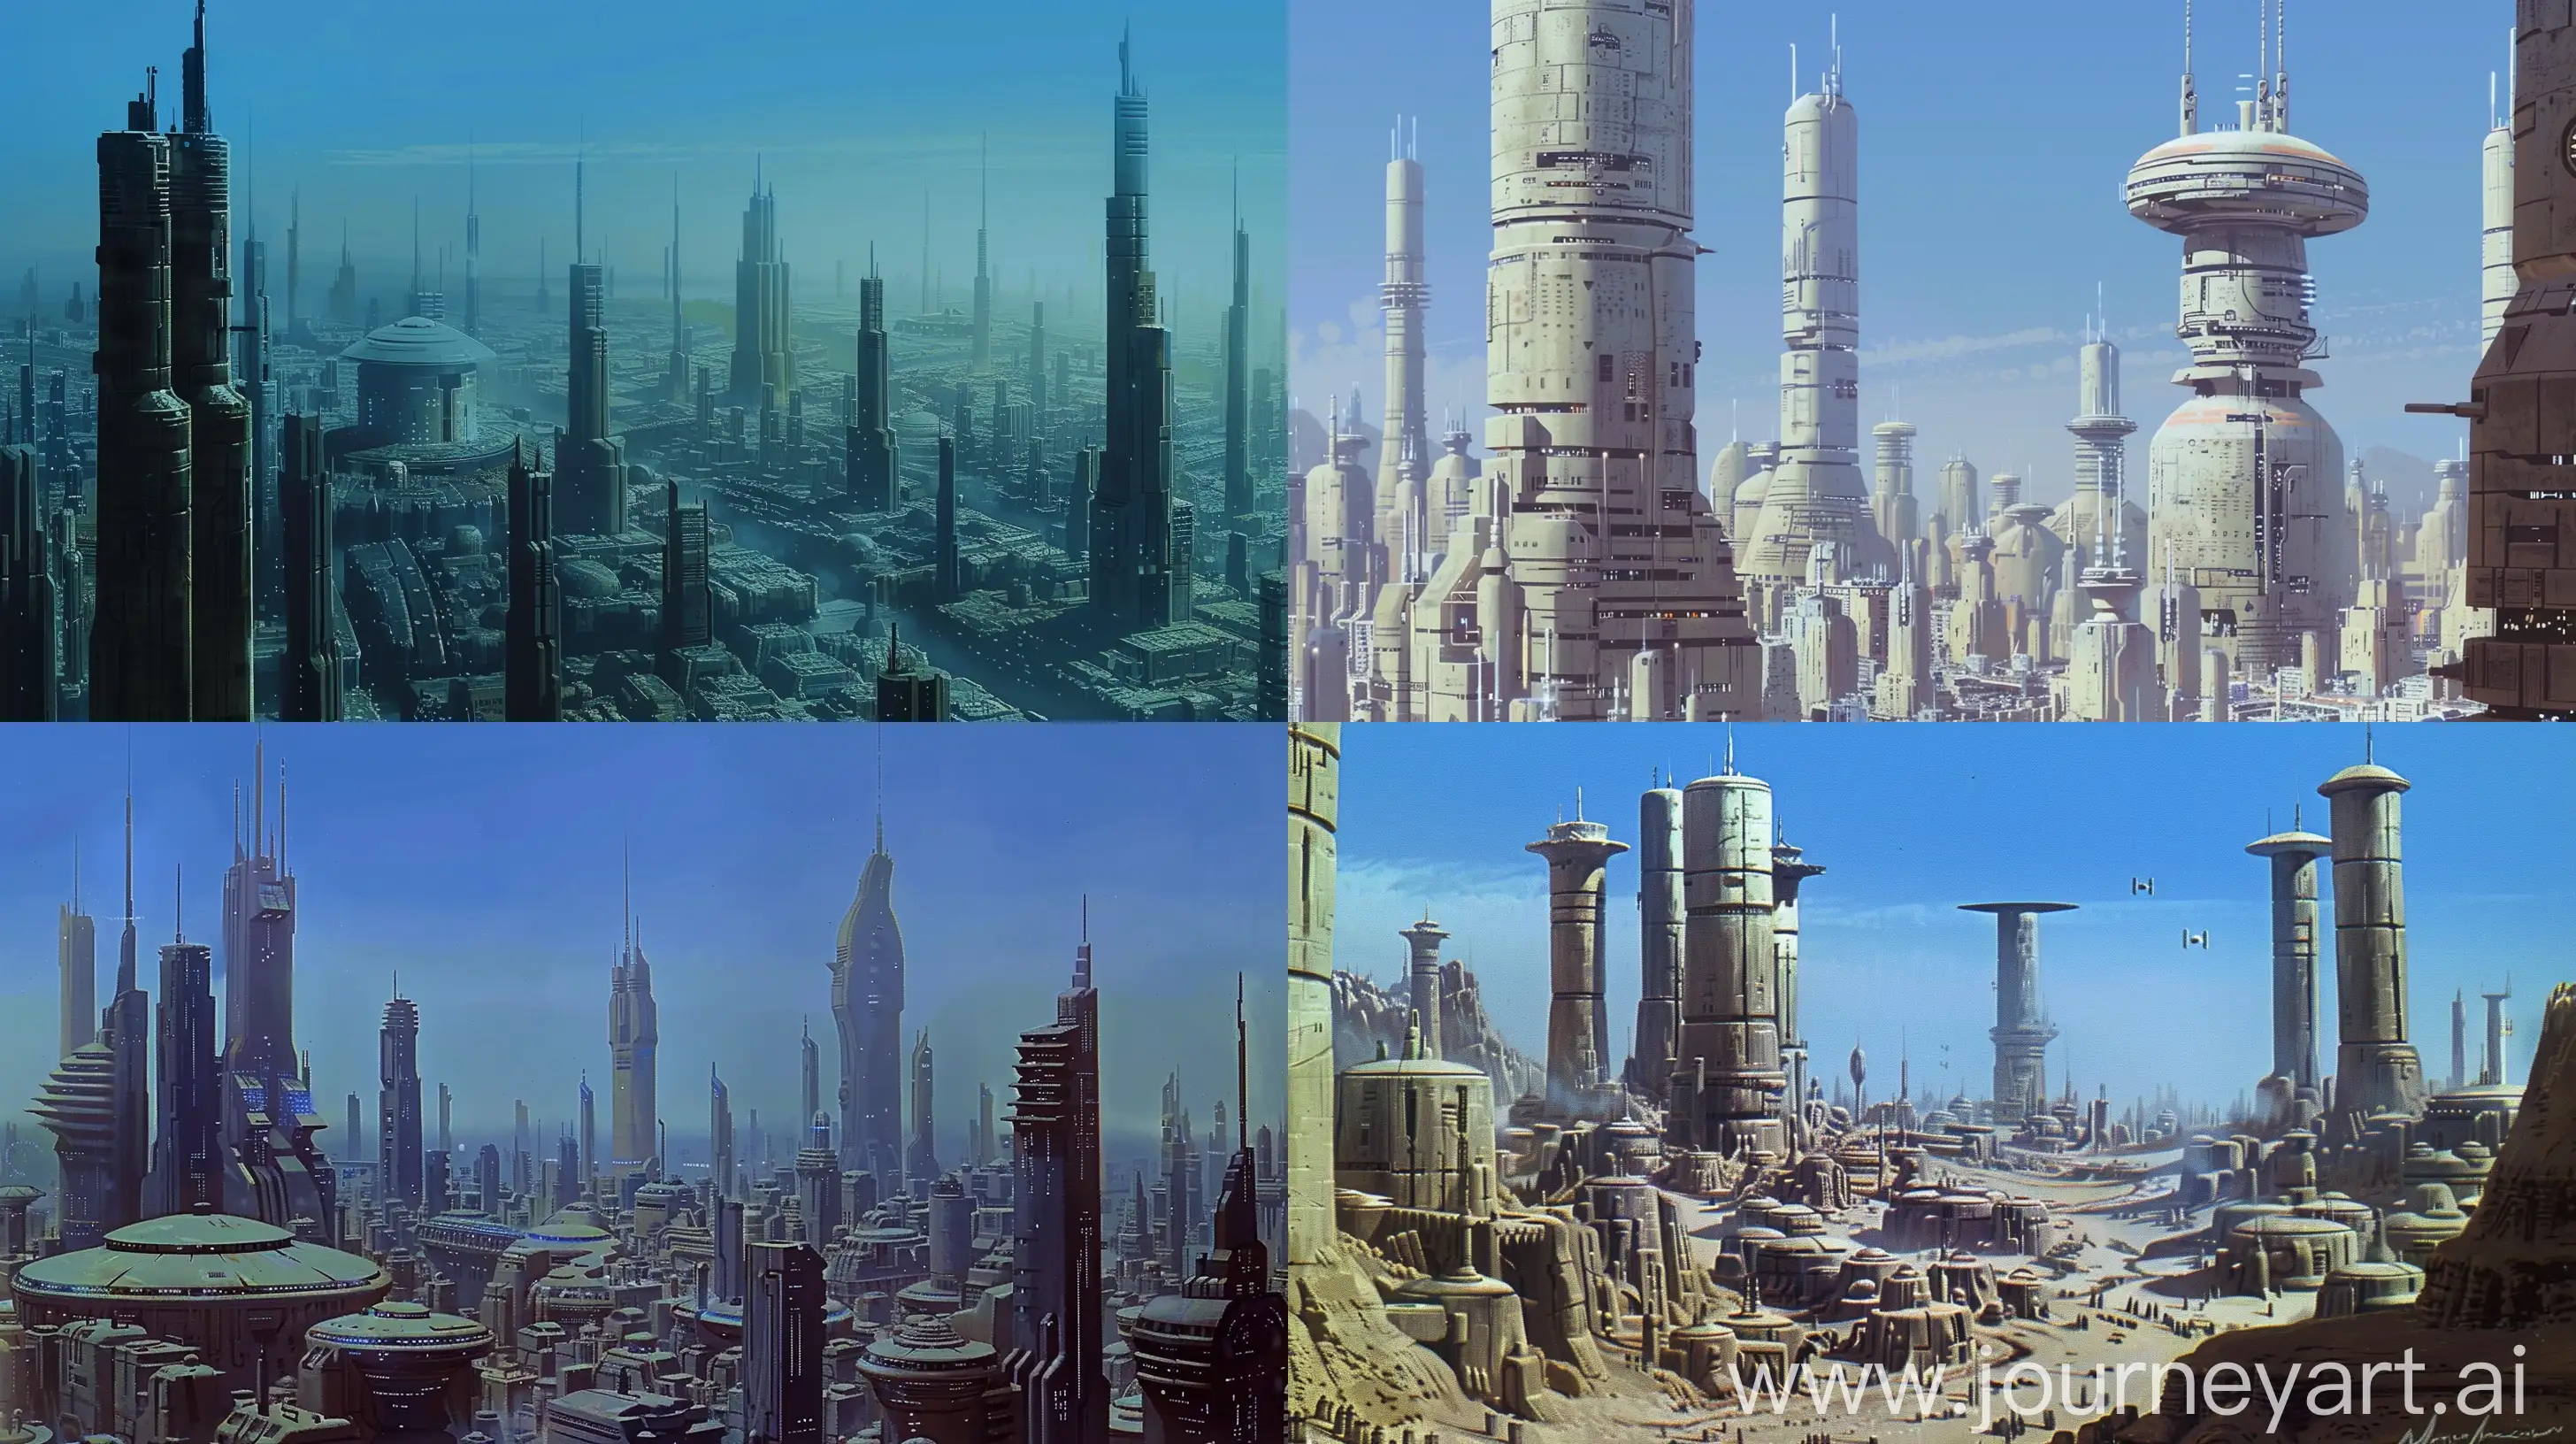 retro 70s sci-fi concept art of the skyline of a dense futuristic city with towers. coruscant. Ralph McQuarrie style. blue sky. --ar 16:9

